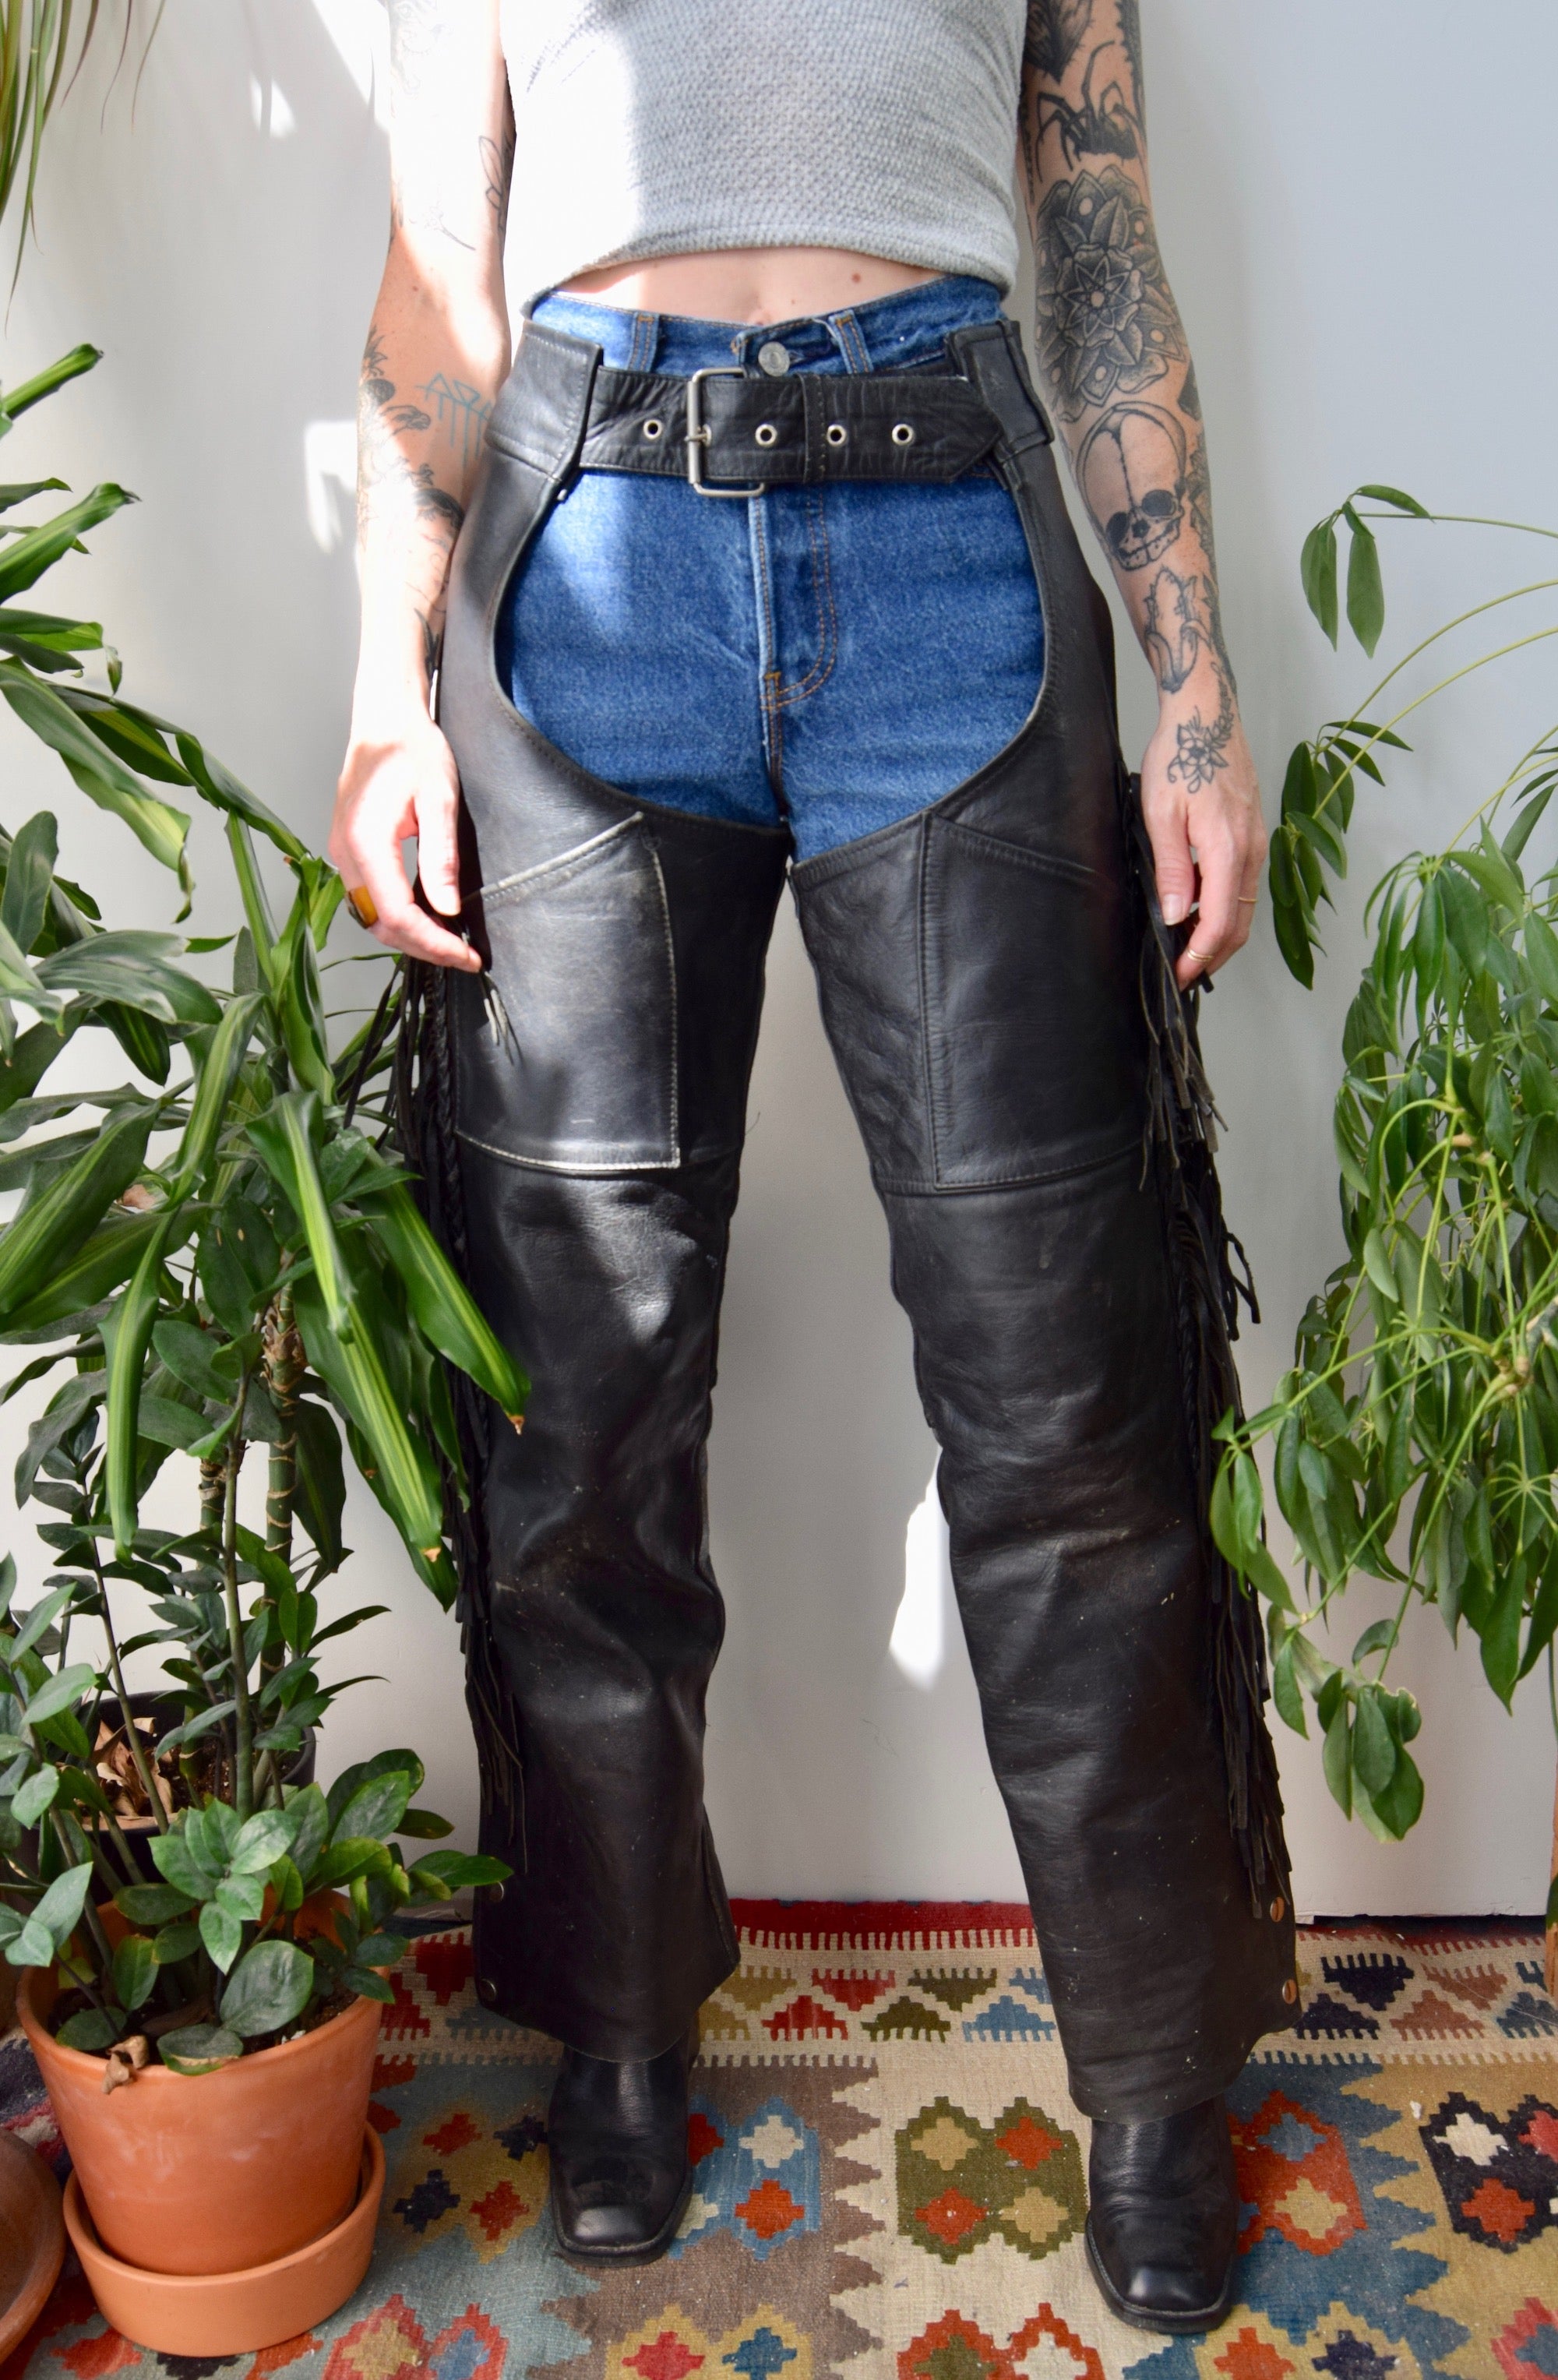 Harley Davidson Chaps. High Quality Leather. Vintage Motorcycle